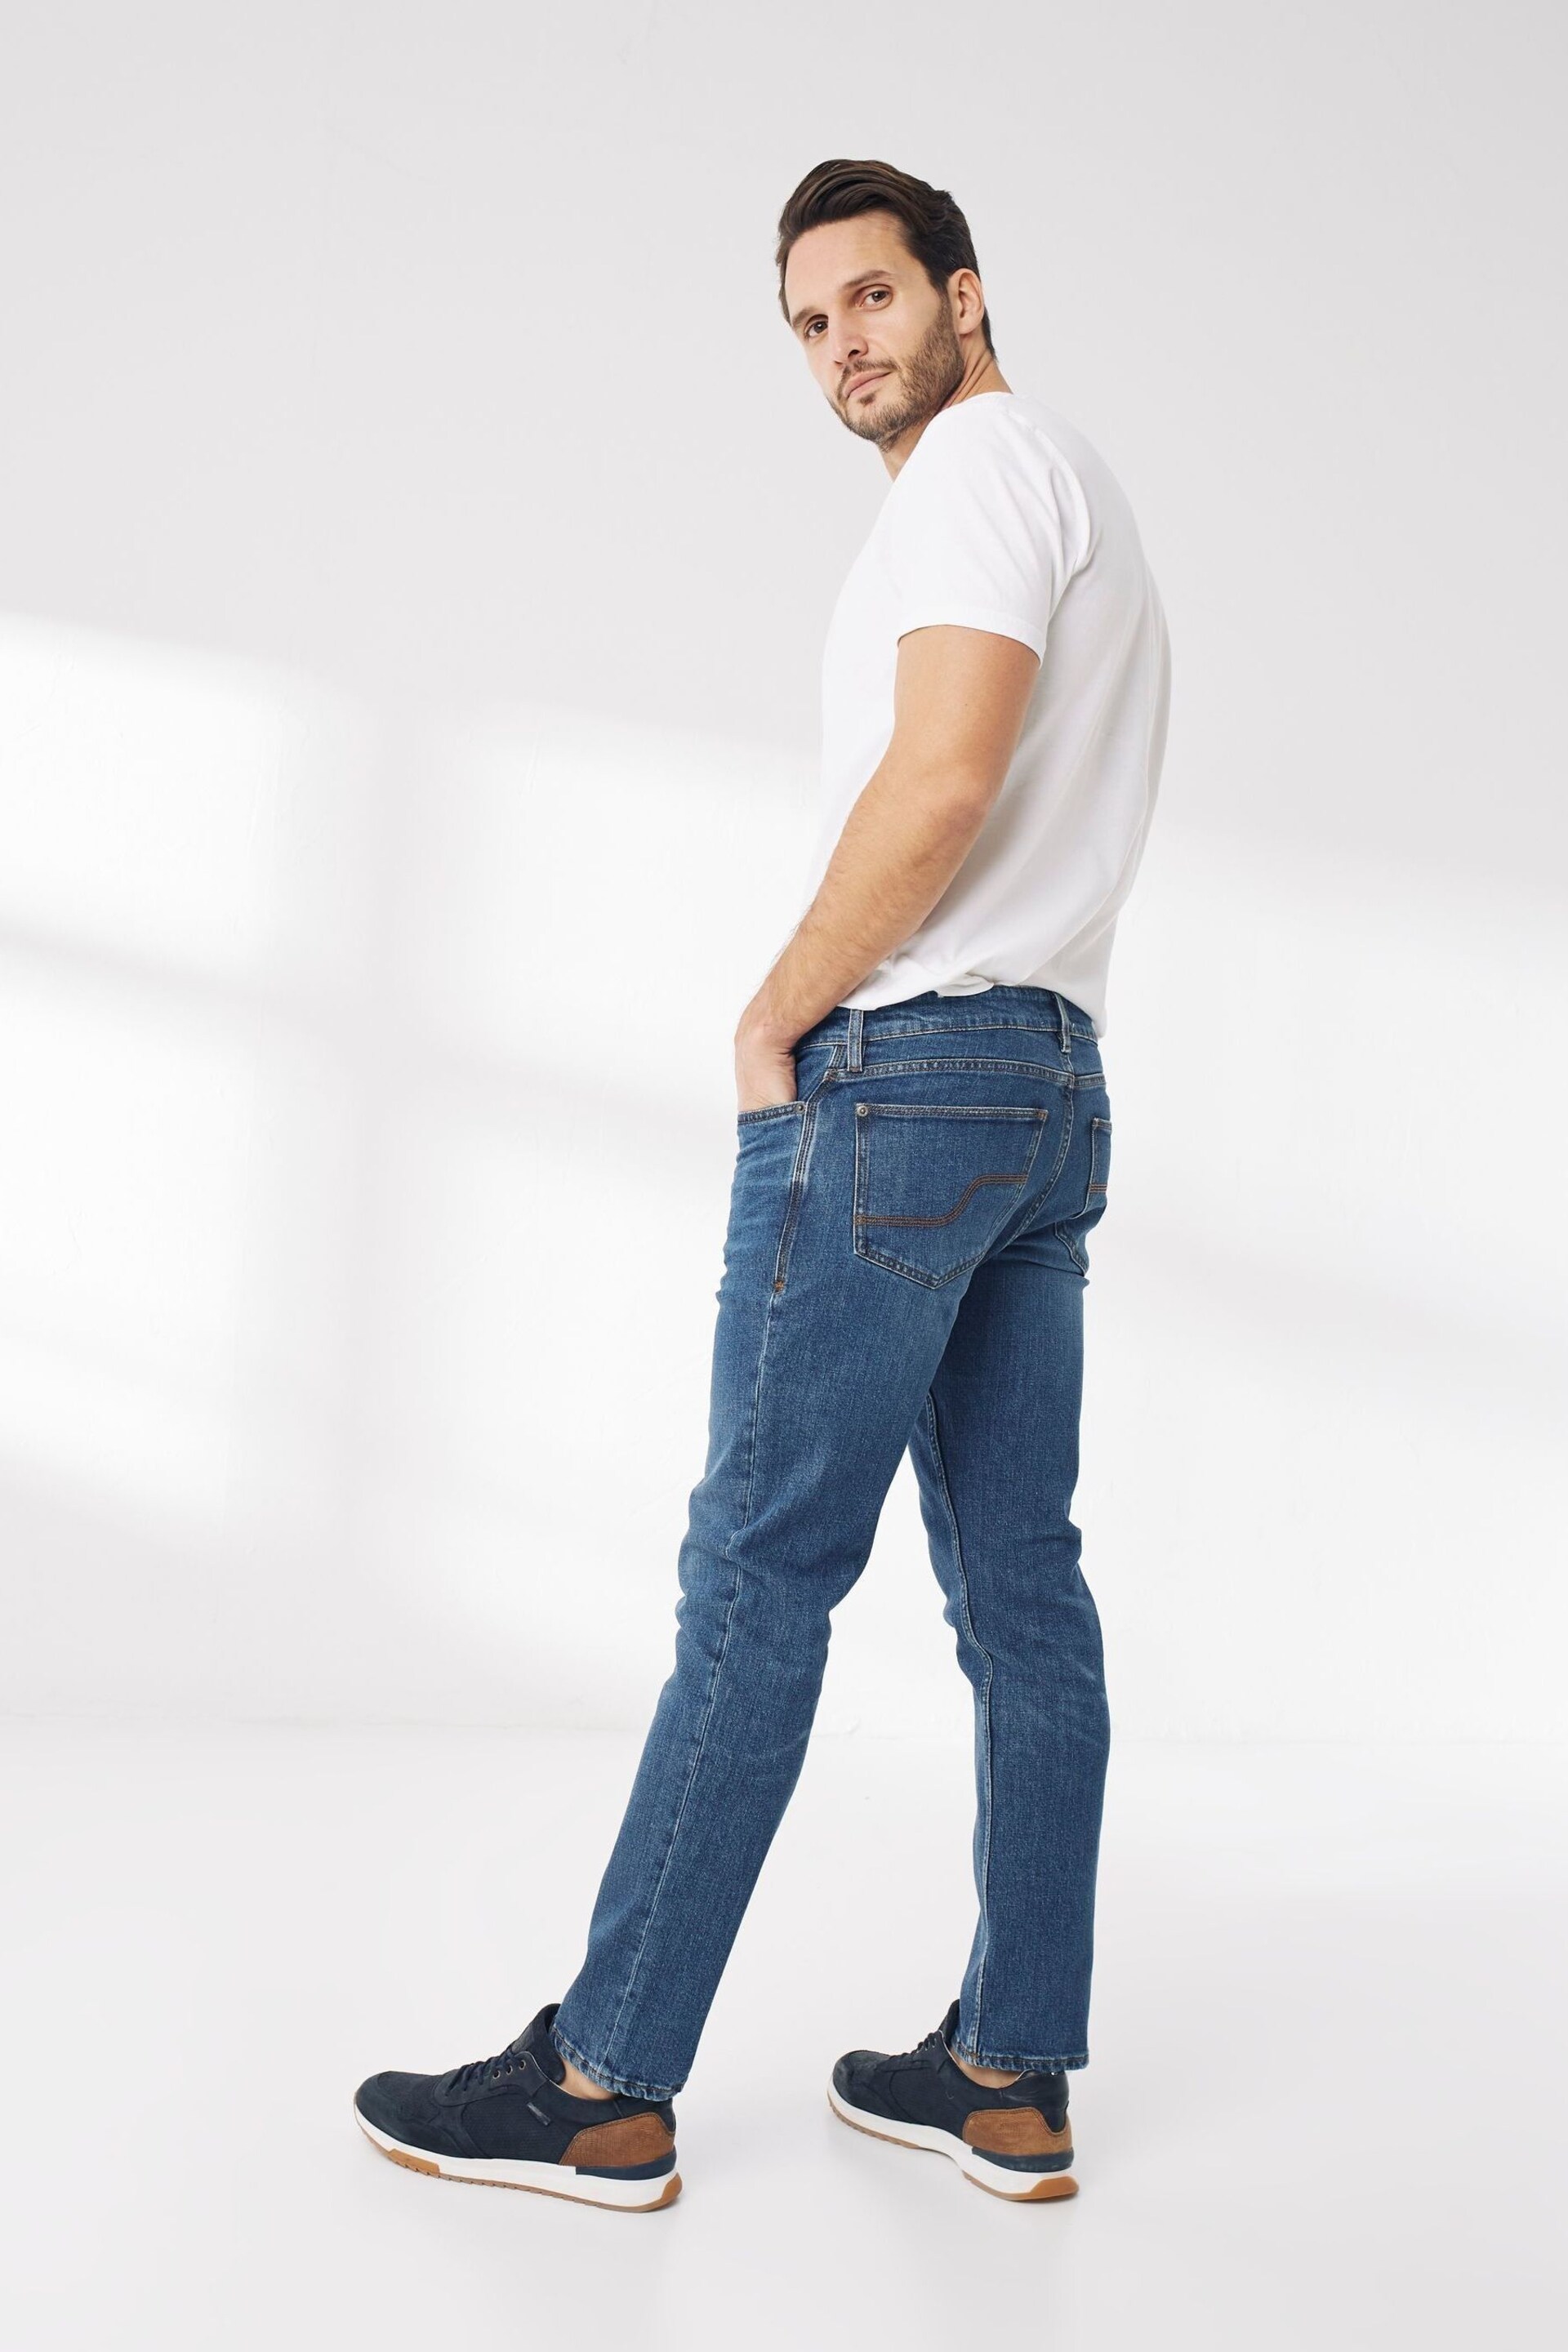 FatFace Blue Slim Stone Wash Jeans - Image 2 of 4